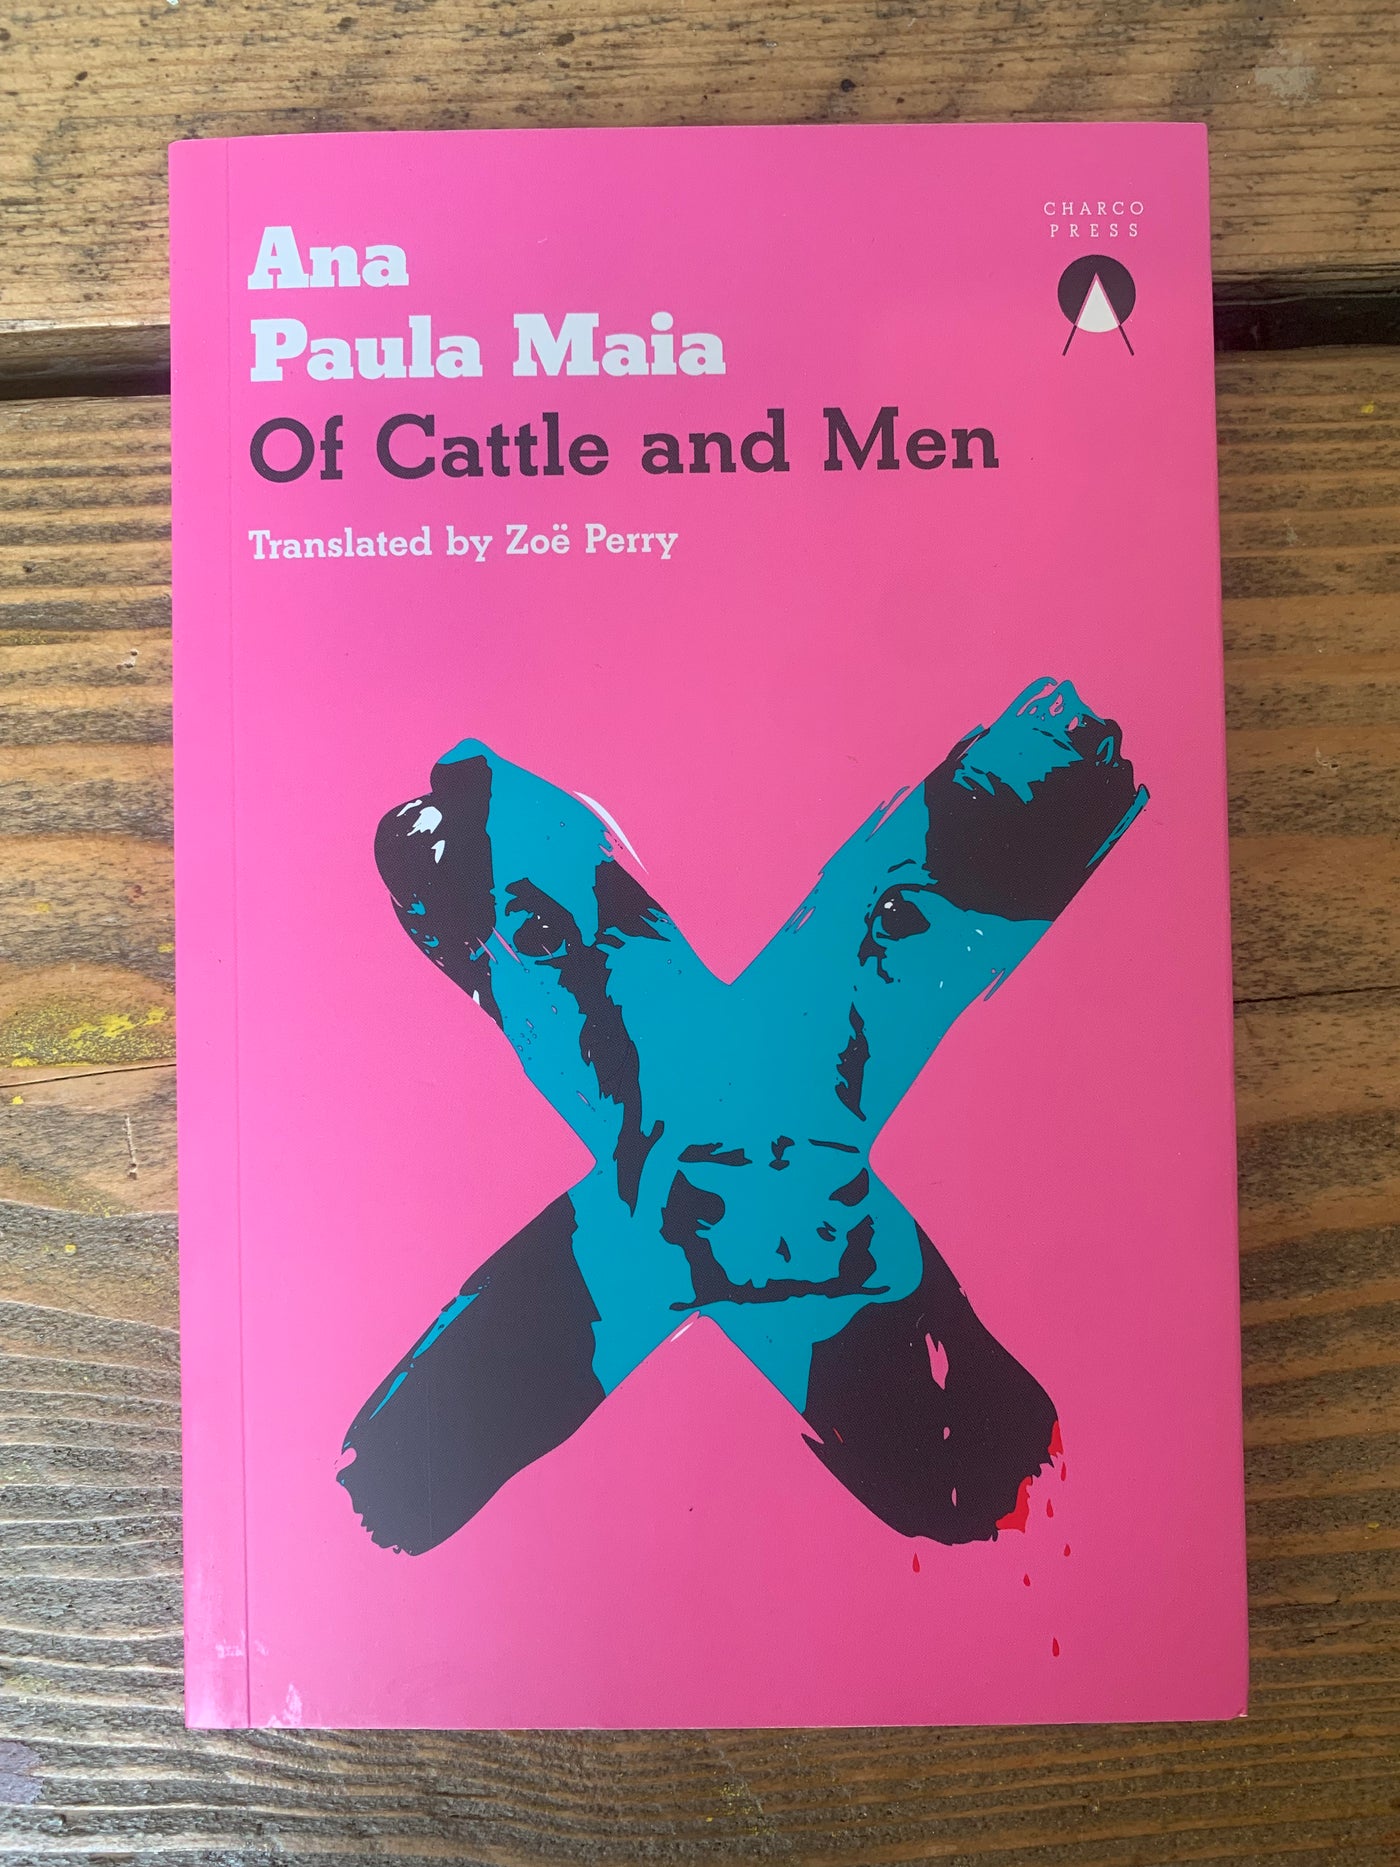 Of Cattle and Men